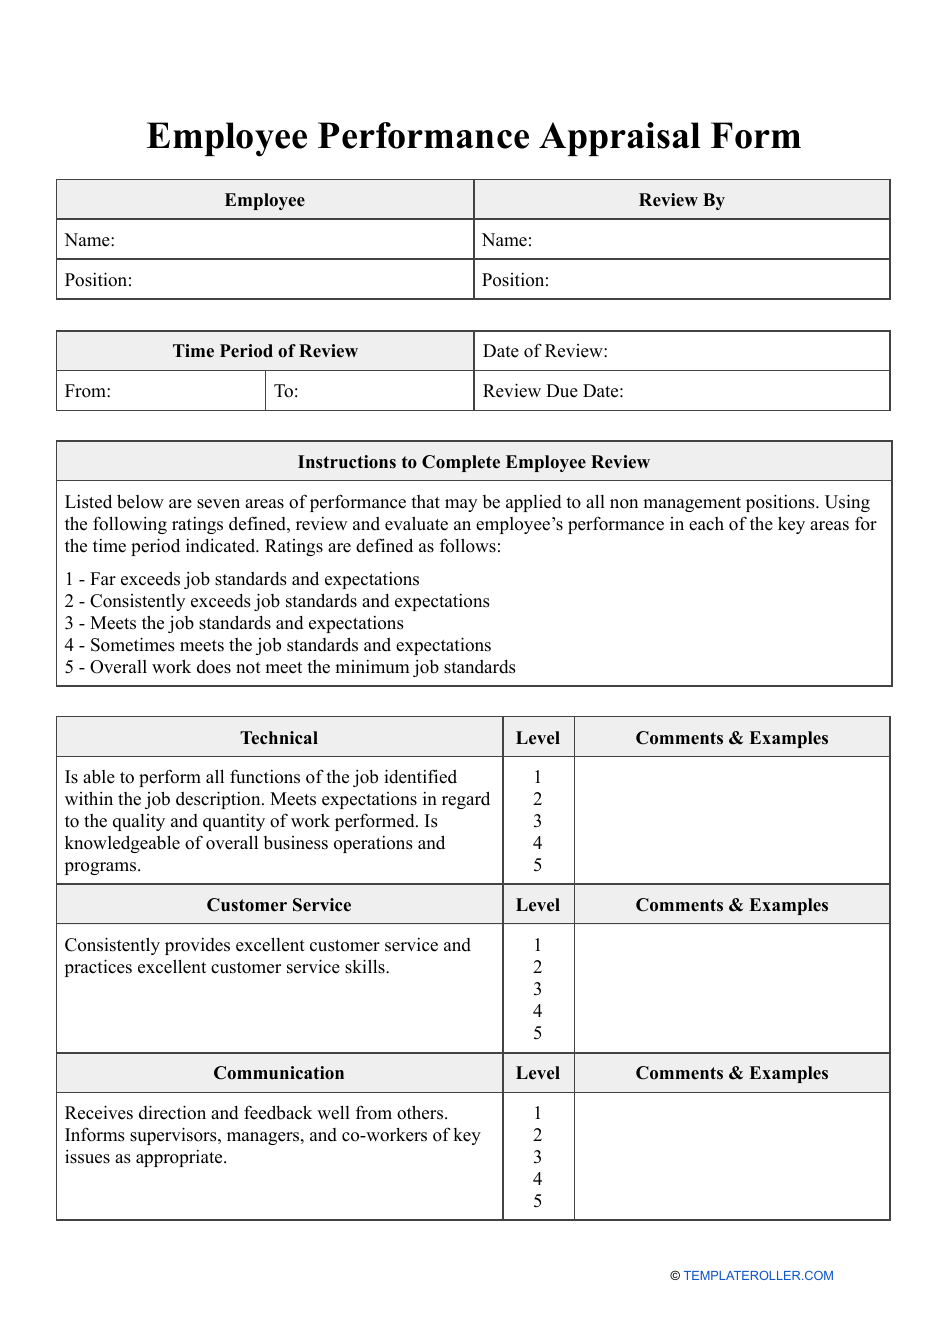 employee-performance-appraisal-form-levels-fill-out-sign-online